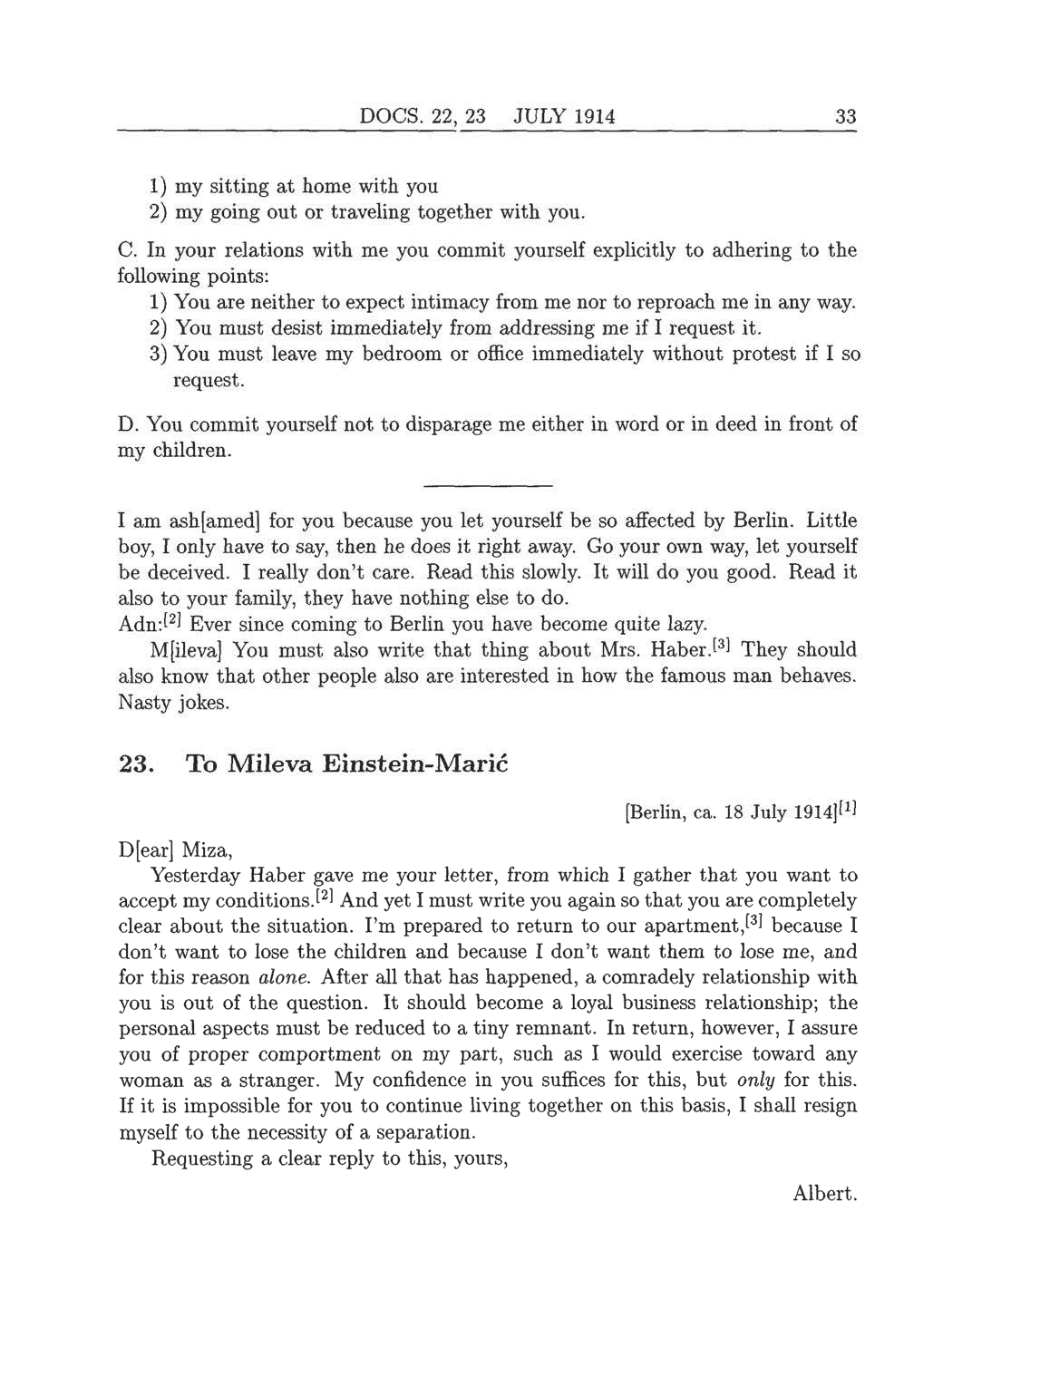 Volume 8: The Berlin Years: Correspondence, 1914-1918 (English translation supplement) page 33